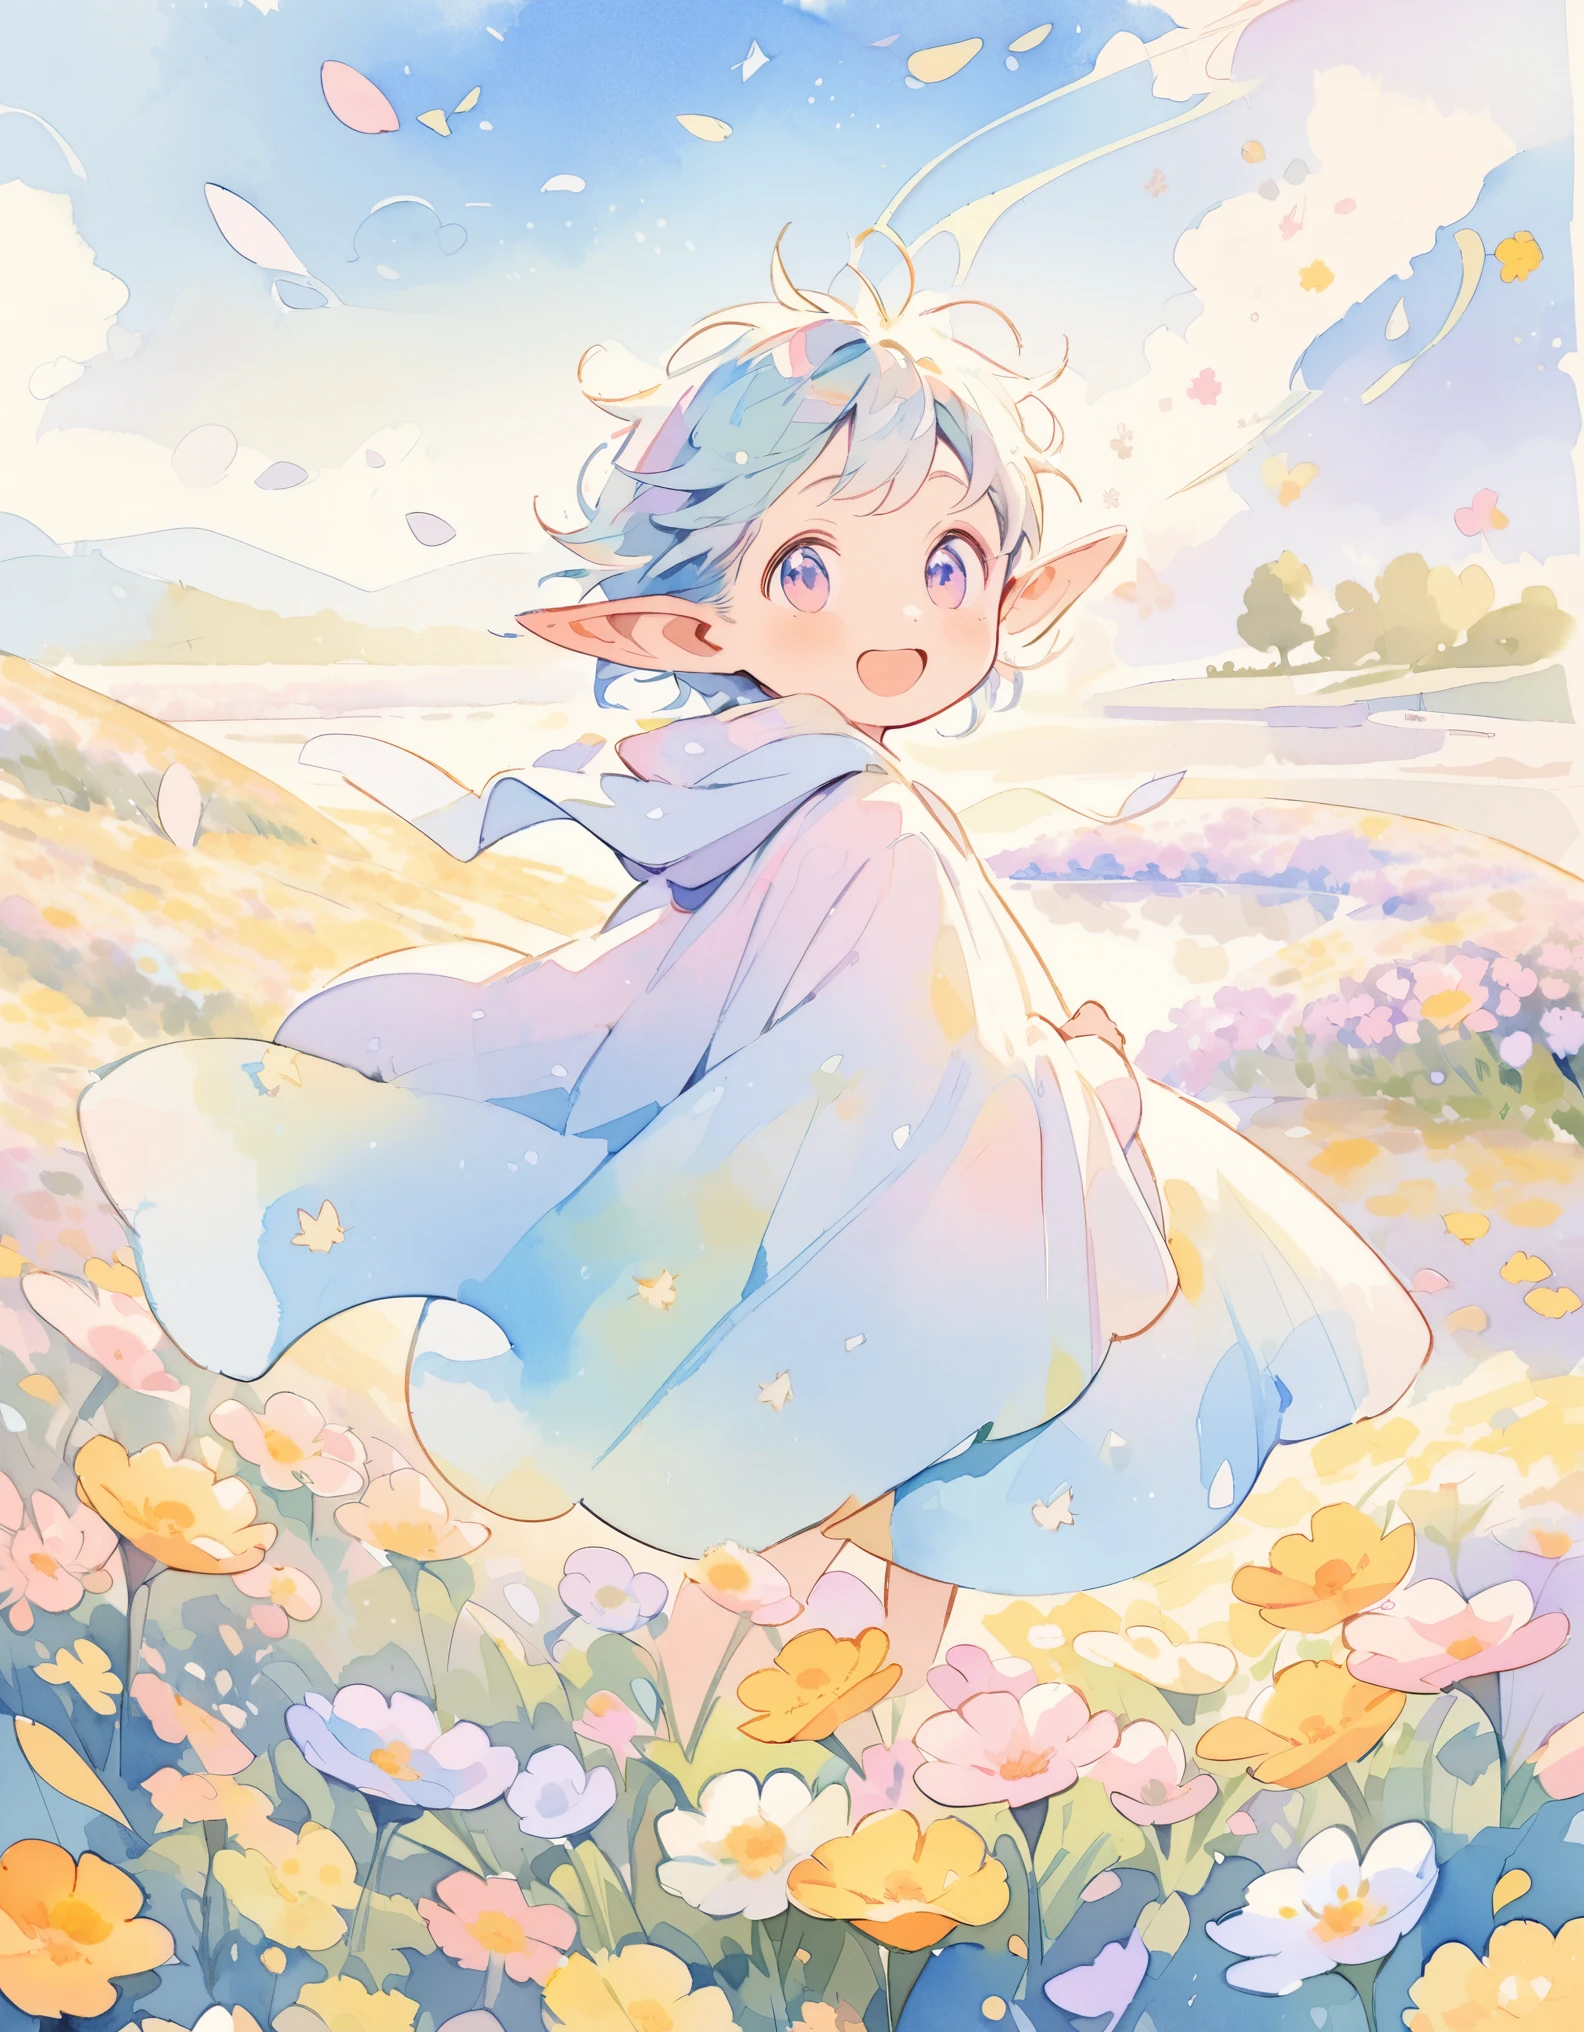 Elf Boy, Pointy Ears, Magic Robe, Expressions of joy, Magic Wind, natural environment, ((Flower Field, pastel colour)), Lakeside, Watercolor. Whimsical and delicate style, Illustrations for children, Children&#39;s book illustrations, masterpiece:1.2,